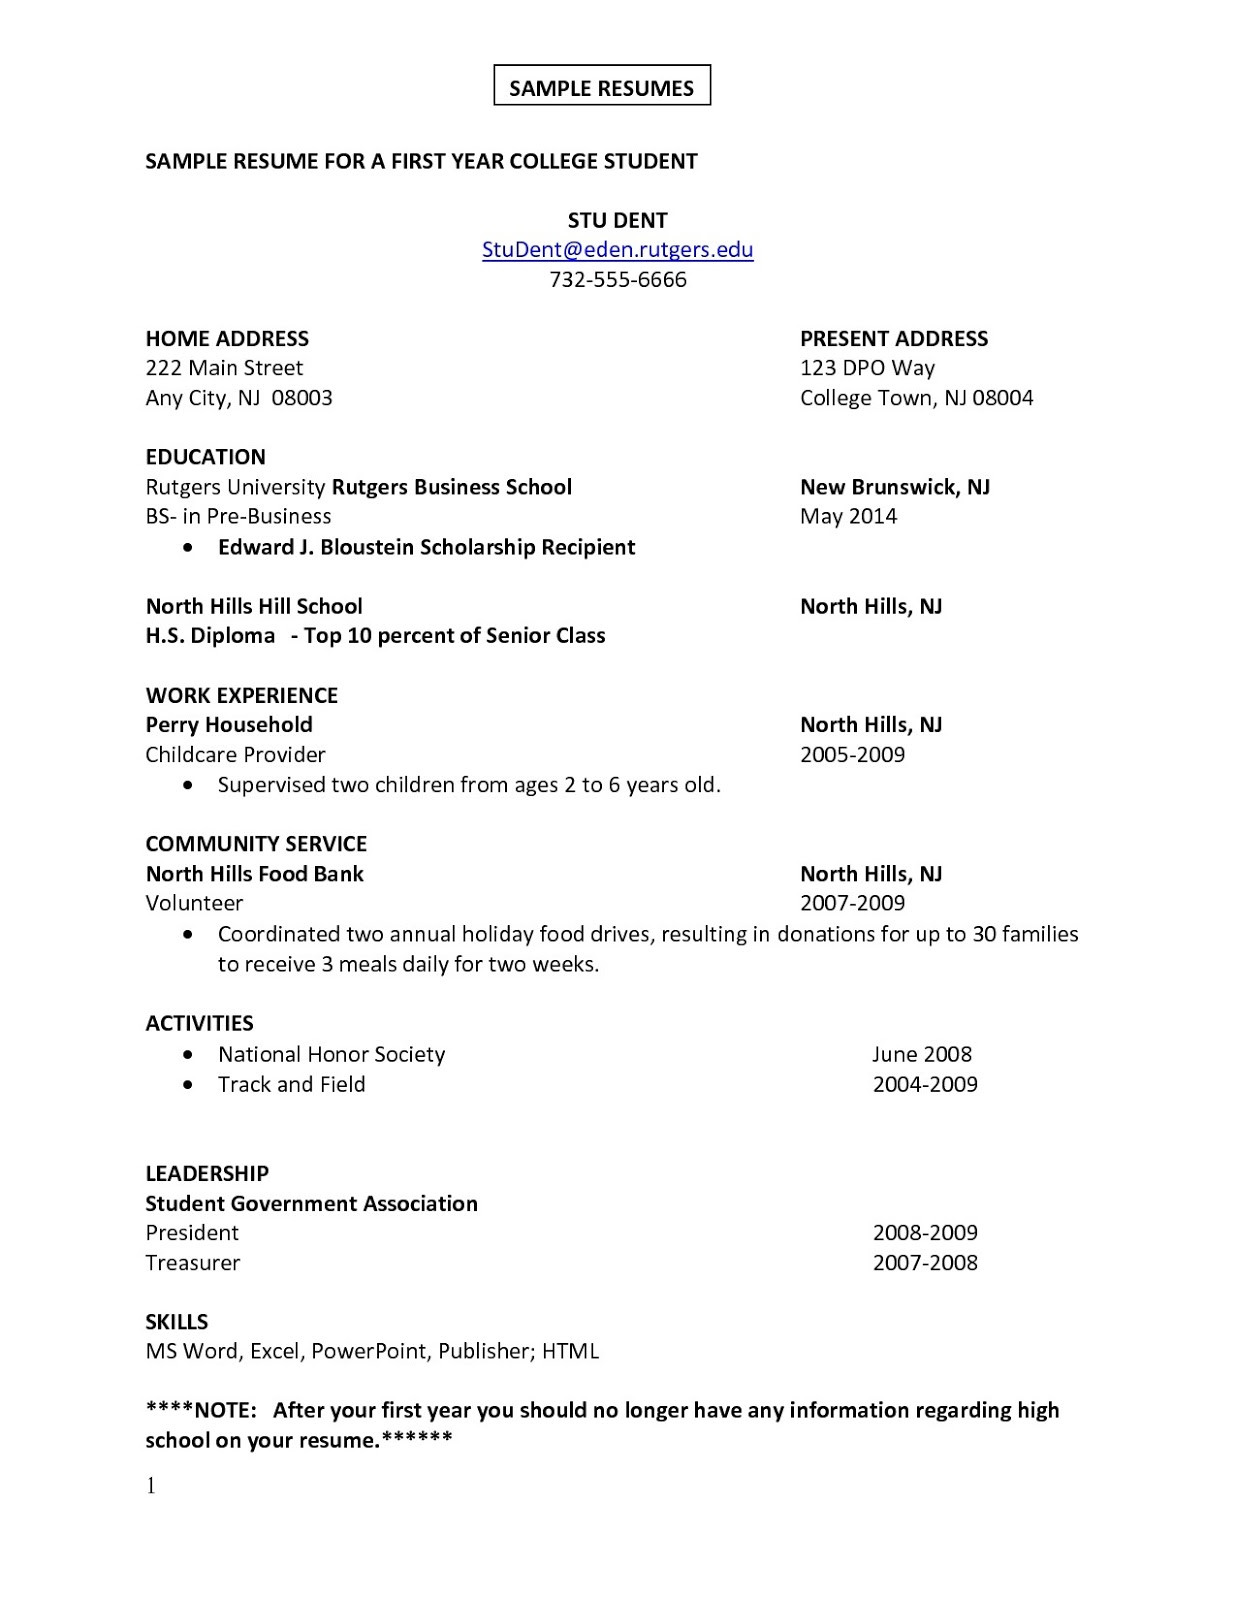 Sample Resume for College Student Looking for Summer Job Current College Student Resume